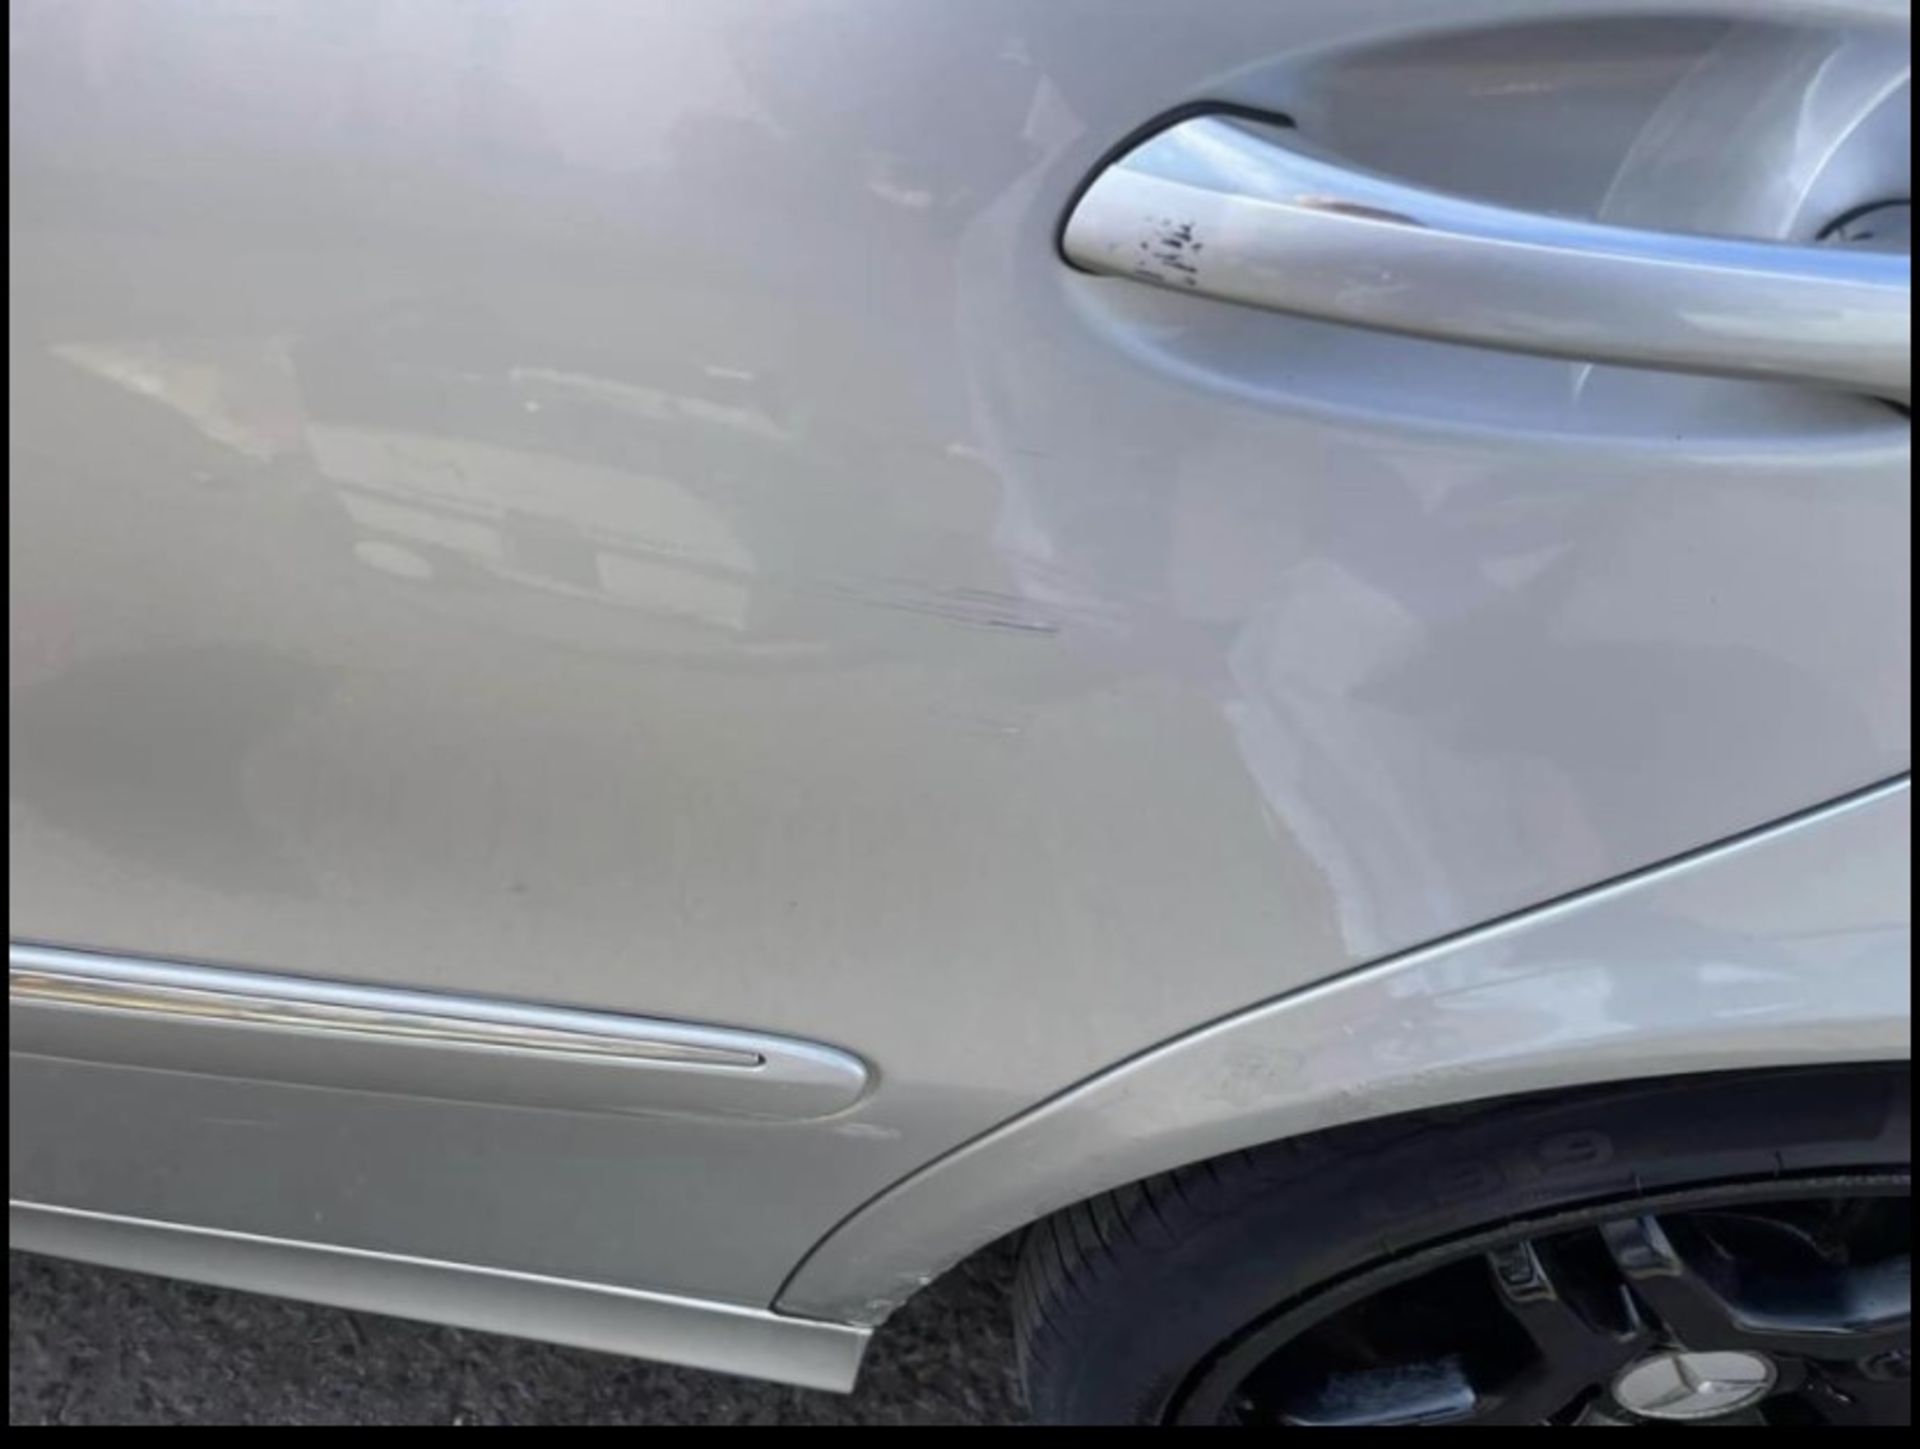 Mercedes E320 CDI 103k genuine miles ,as per pictures has scratches as shown in photos but is all in - Image 7 of 14